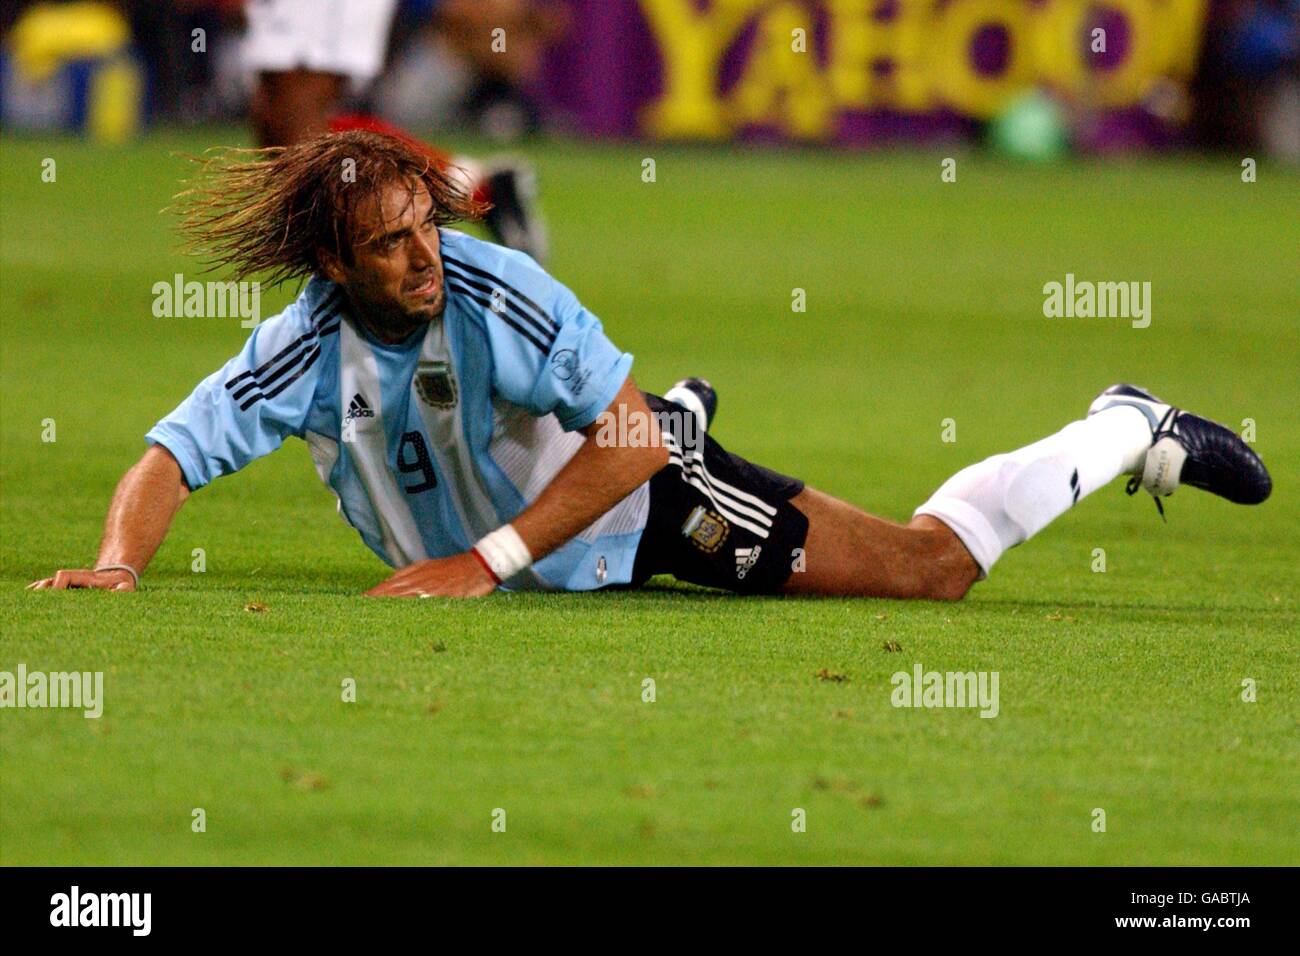 Soccer - FIFA World Cup 2002 - Group F - Argentina v England. Argentina's Gabriel Batistuta lies on the ground after missing a chance against England Stock Photo